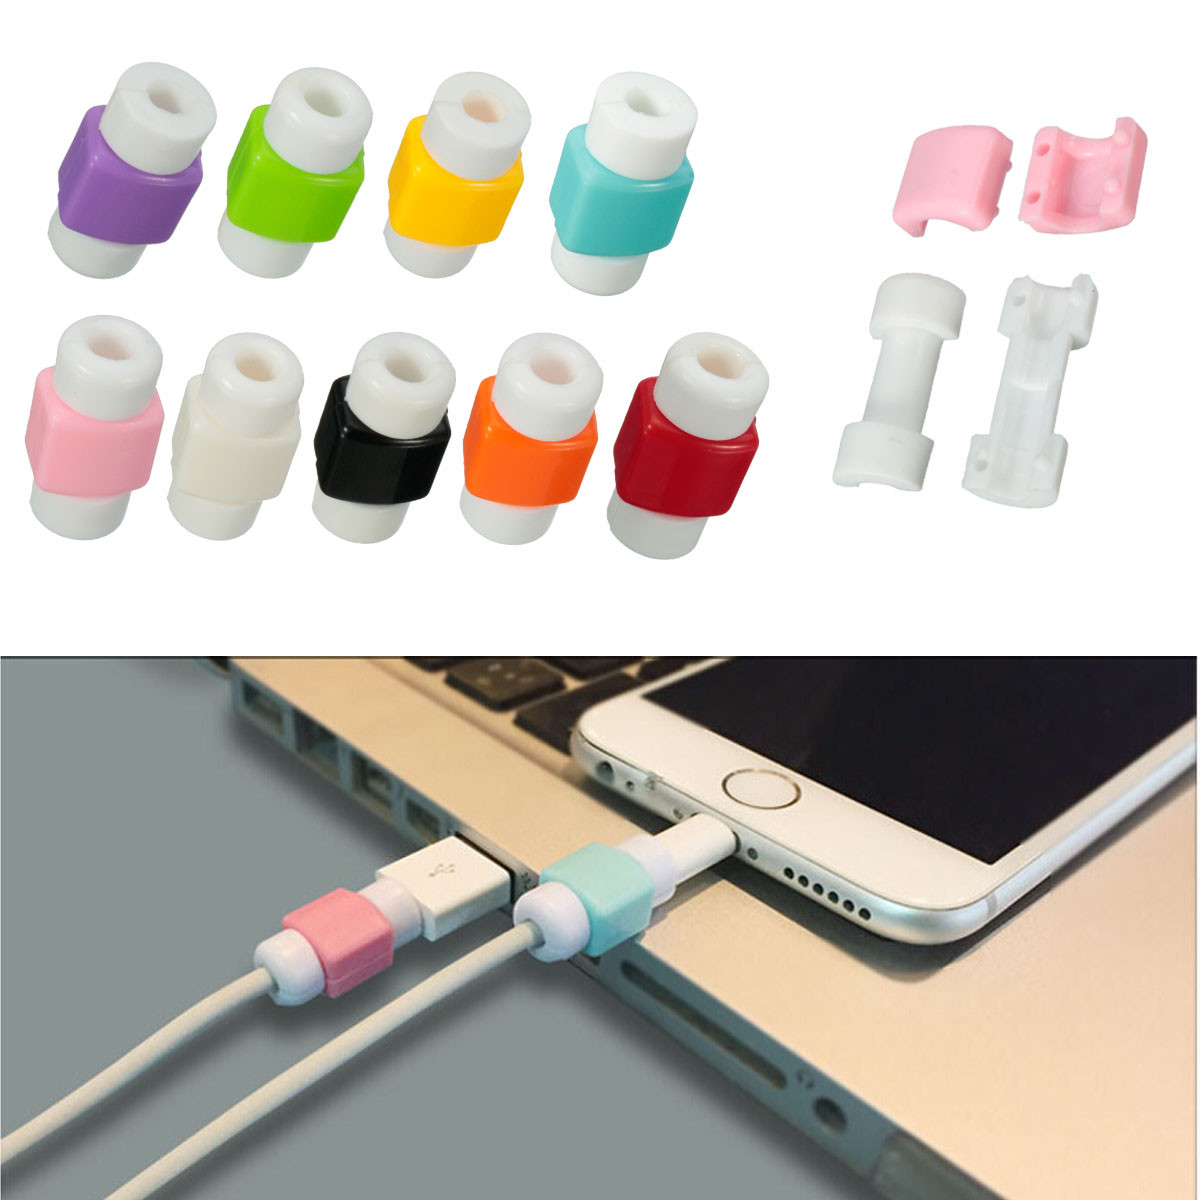 

USB Data Charger Cable Protector for iPhone Xiaomi Samsung Huawei